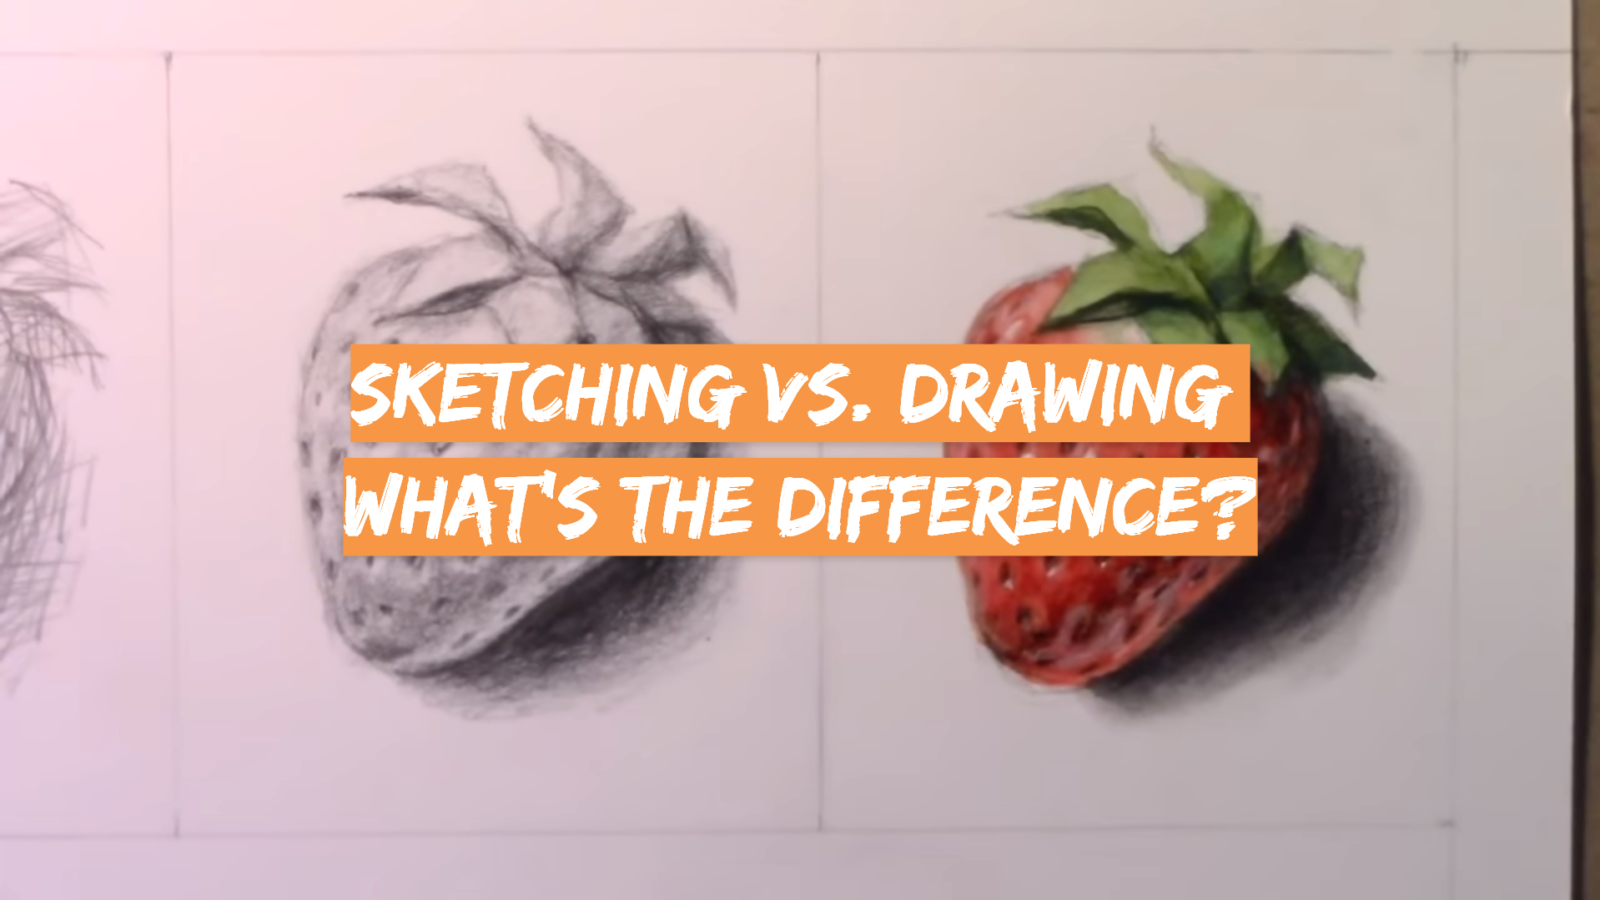 Sketching vs. Drawing: What’s the Difference?